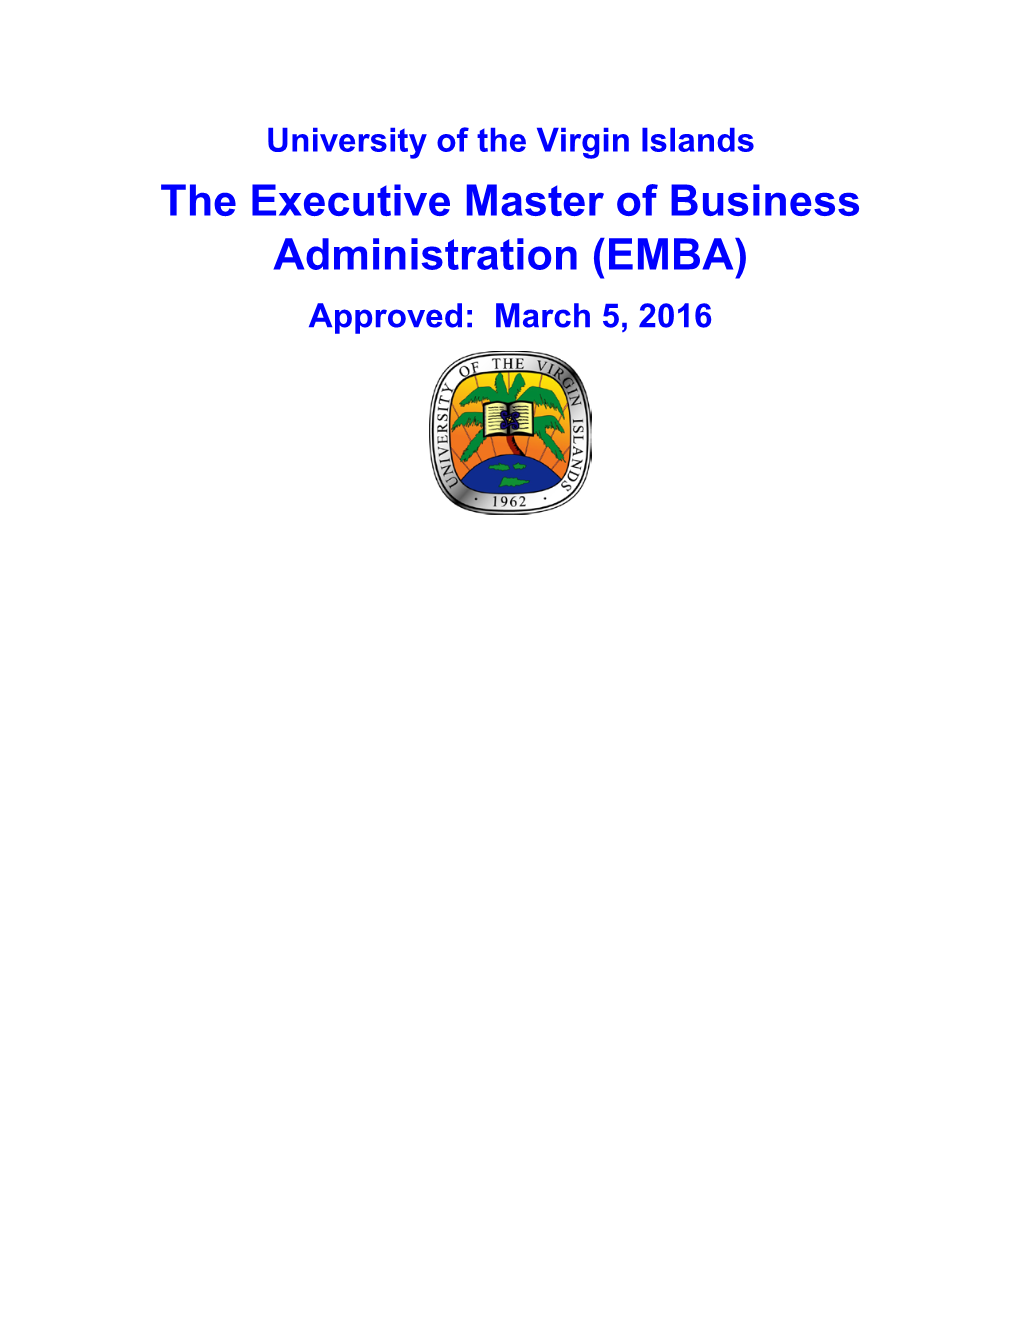 The Executive Master of Business Administration (EMBA) Approved: March 5, 2016